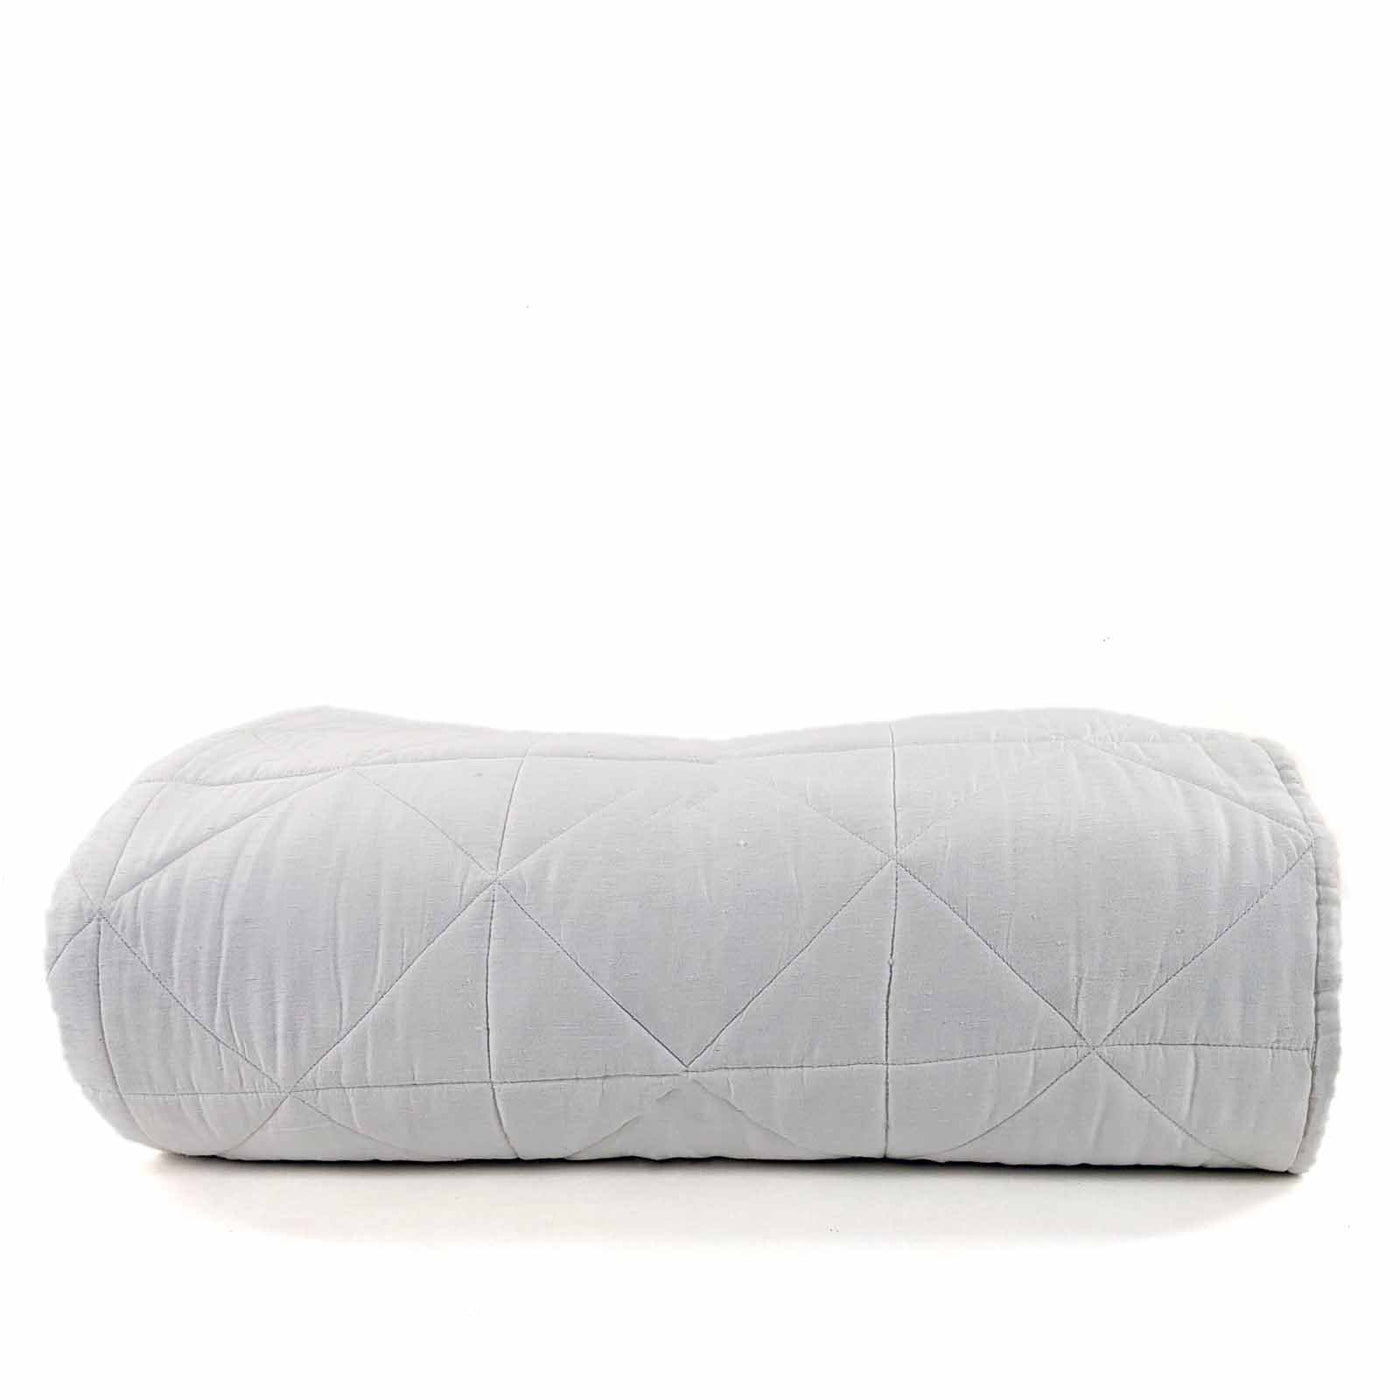 Diamond Quilted Bed Spread Ivory White Large 96"